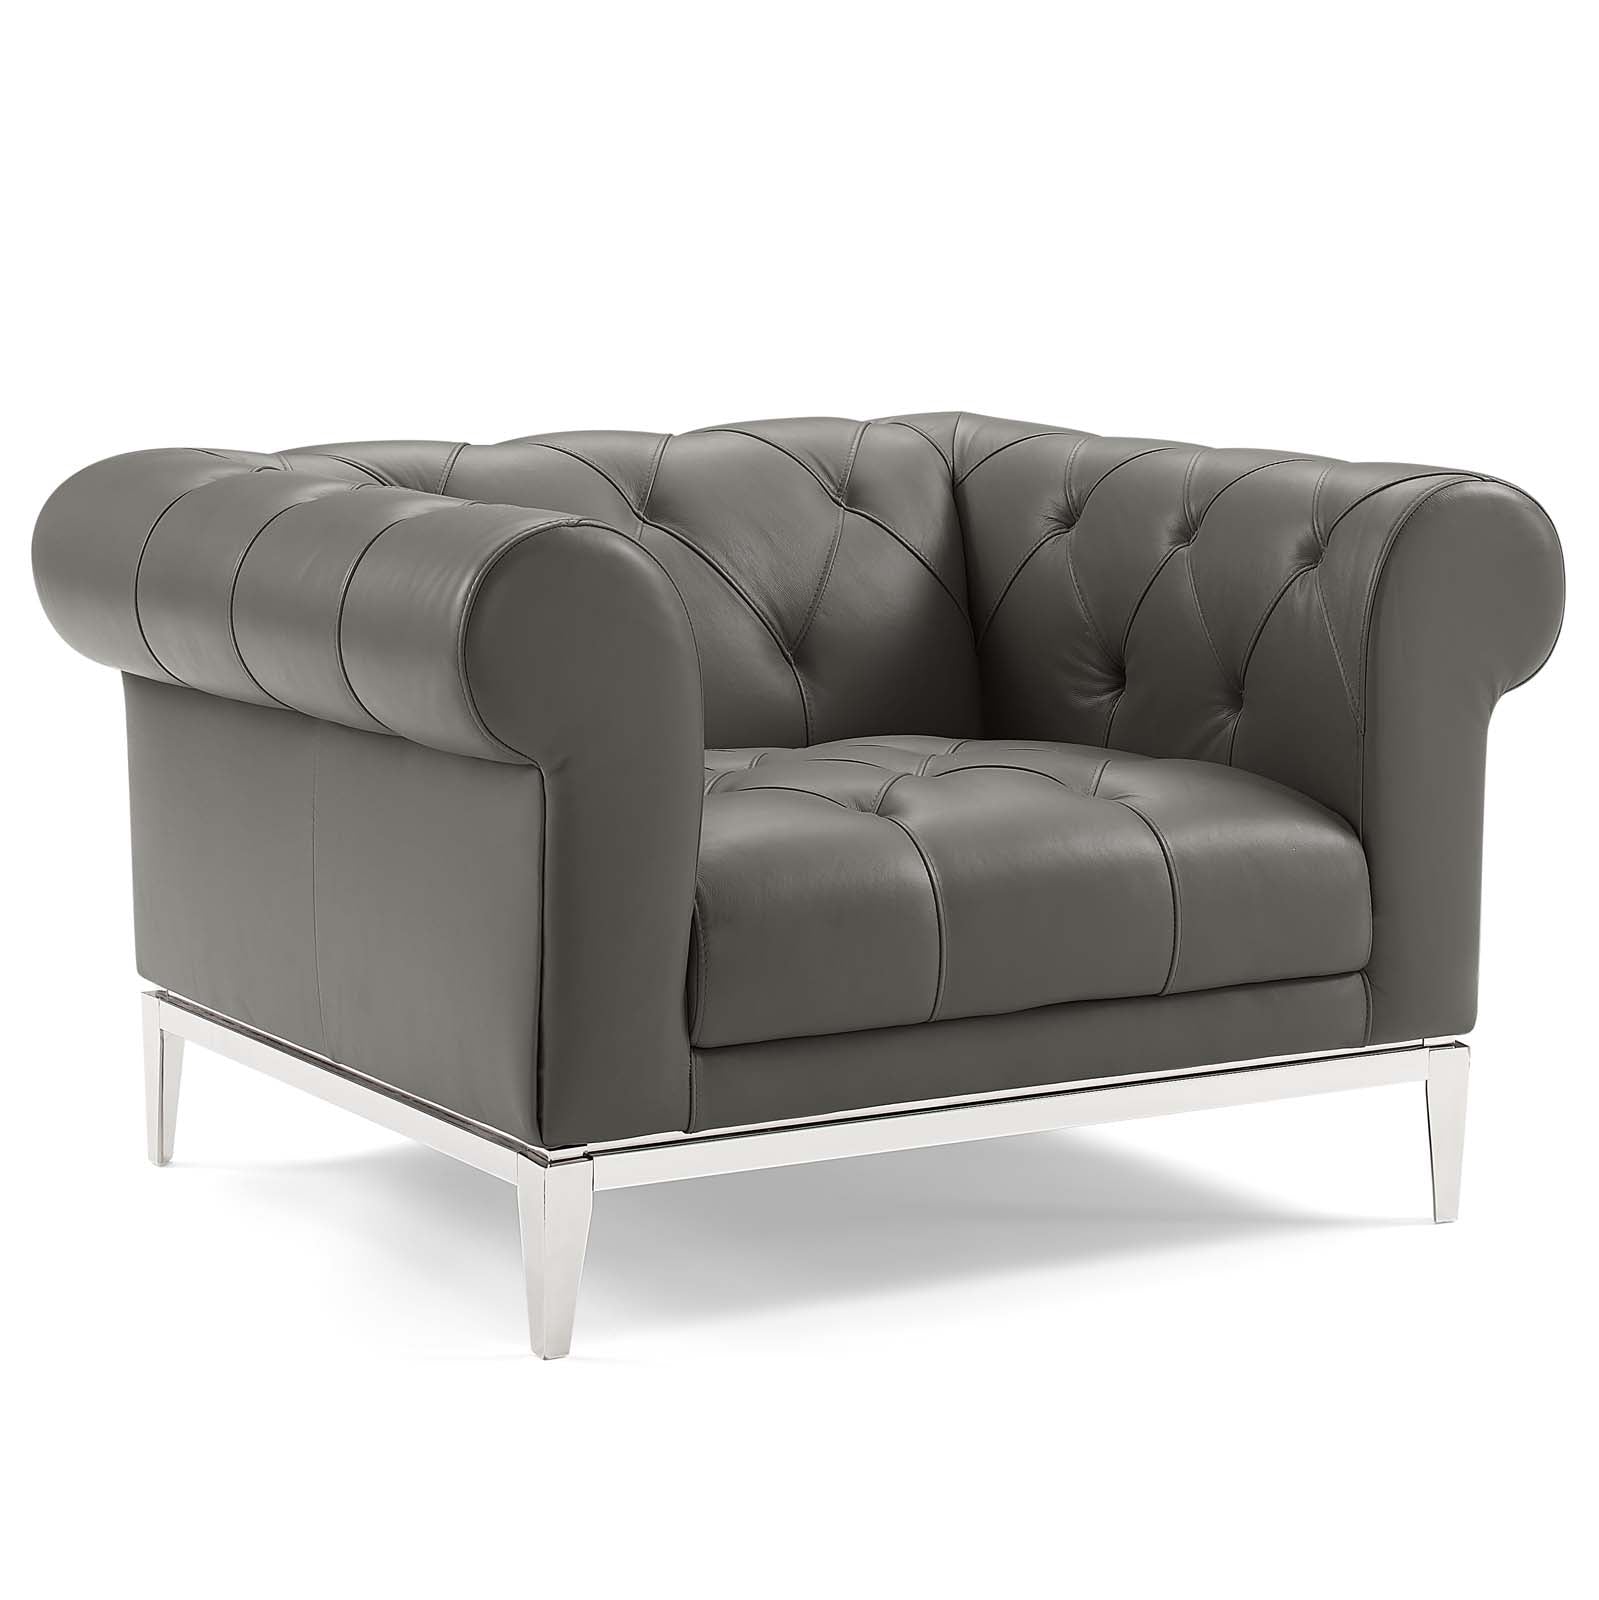 Modway Sofas & Couches - Idyll-Tufted-Upholstered-Leather-Sofa-and-Armchair-Set-Gray